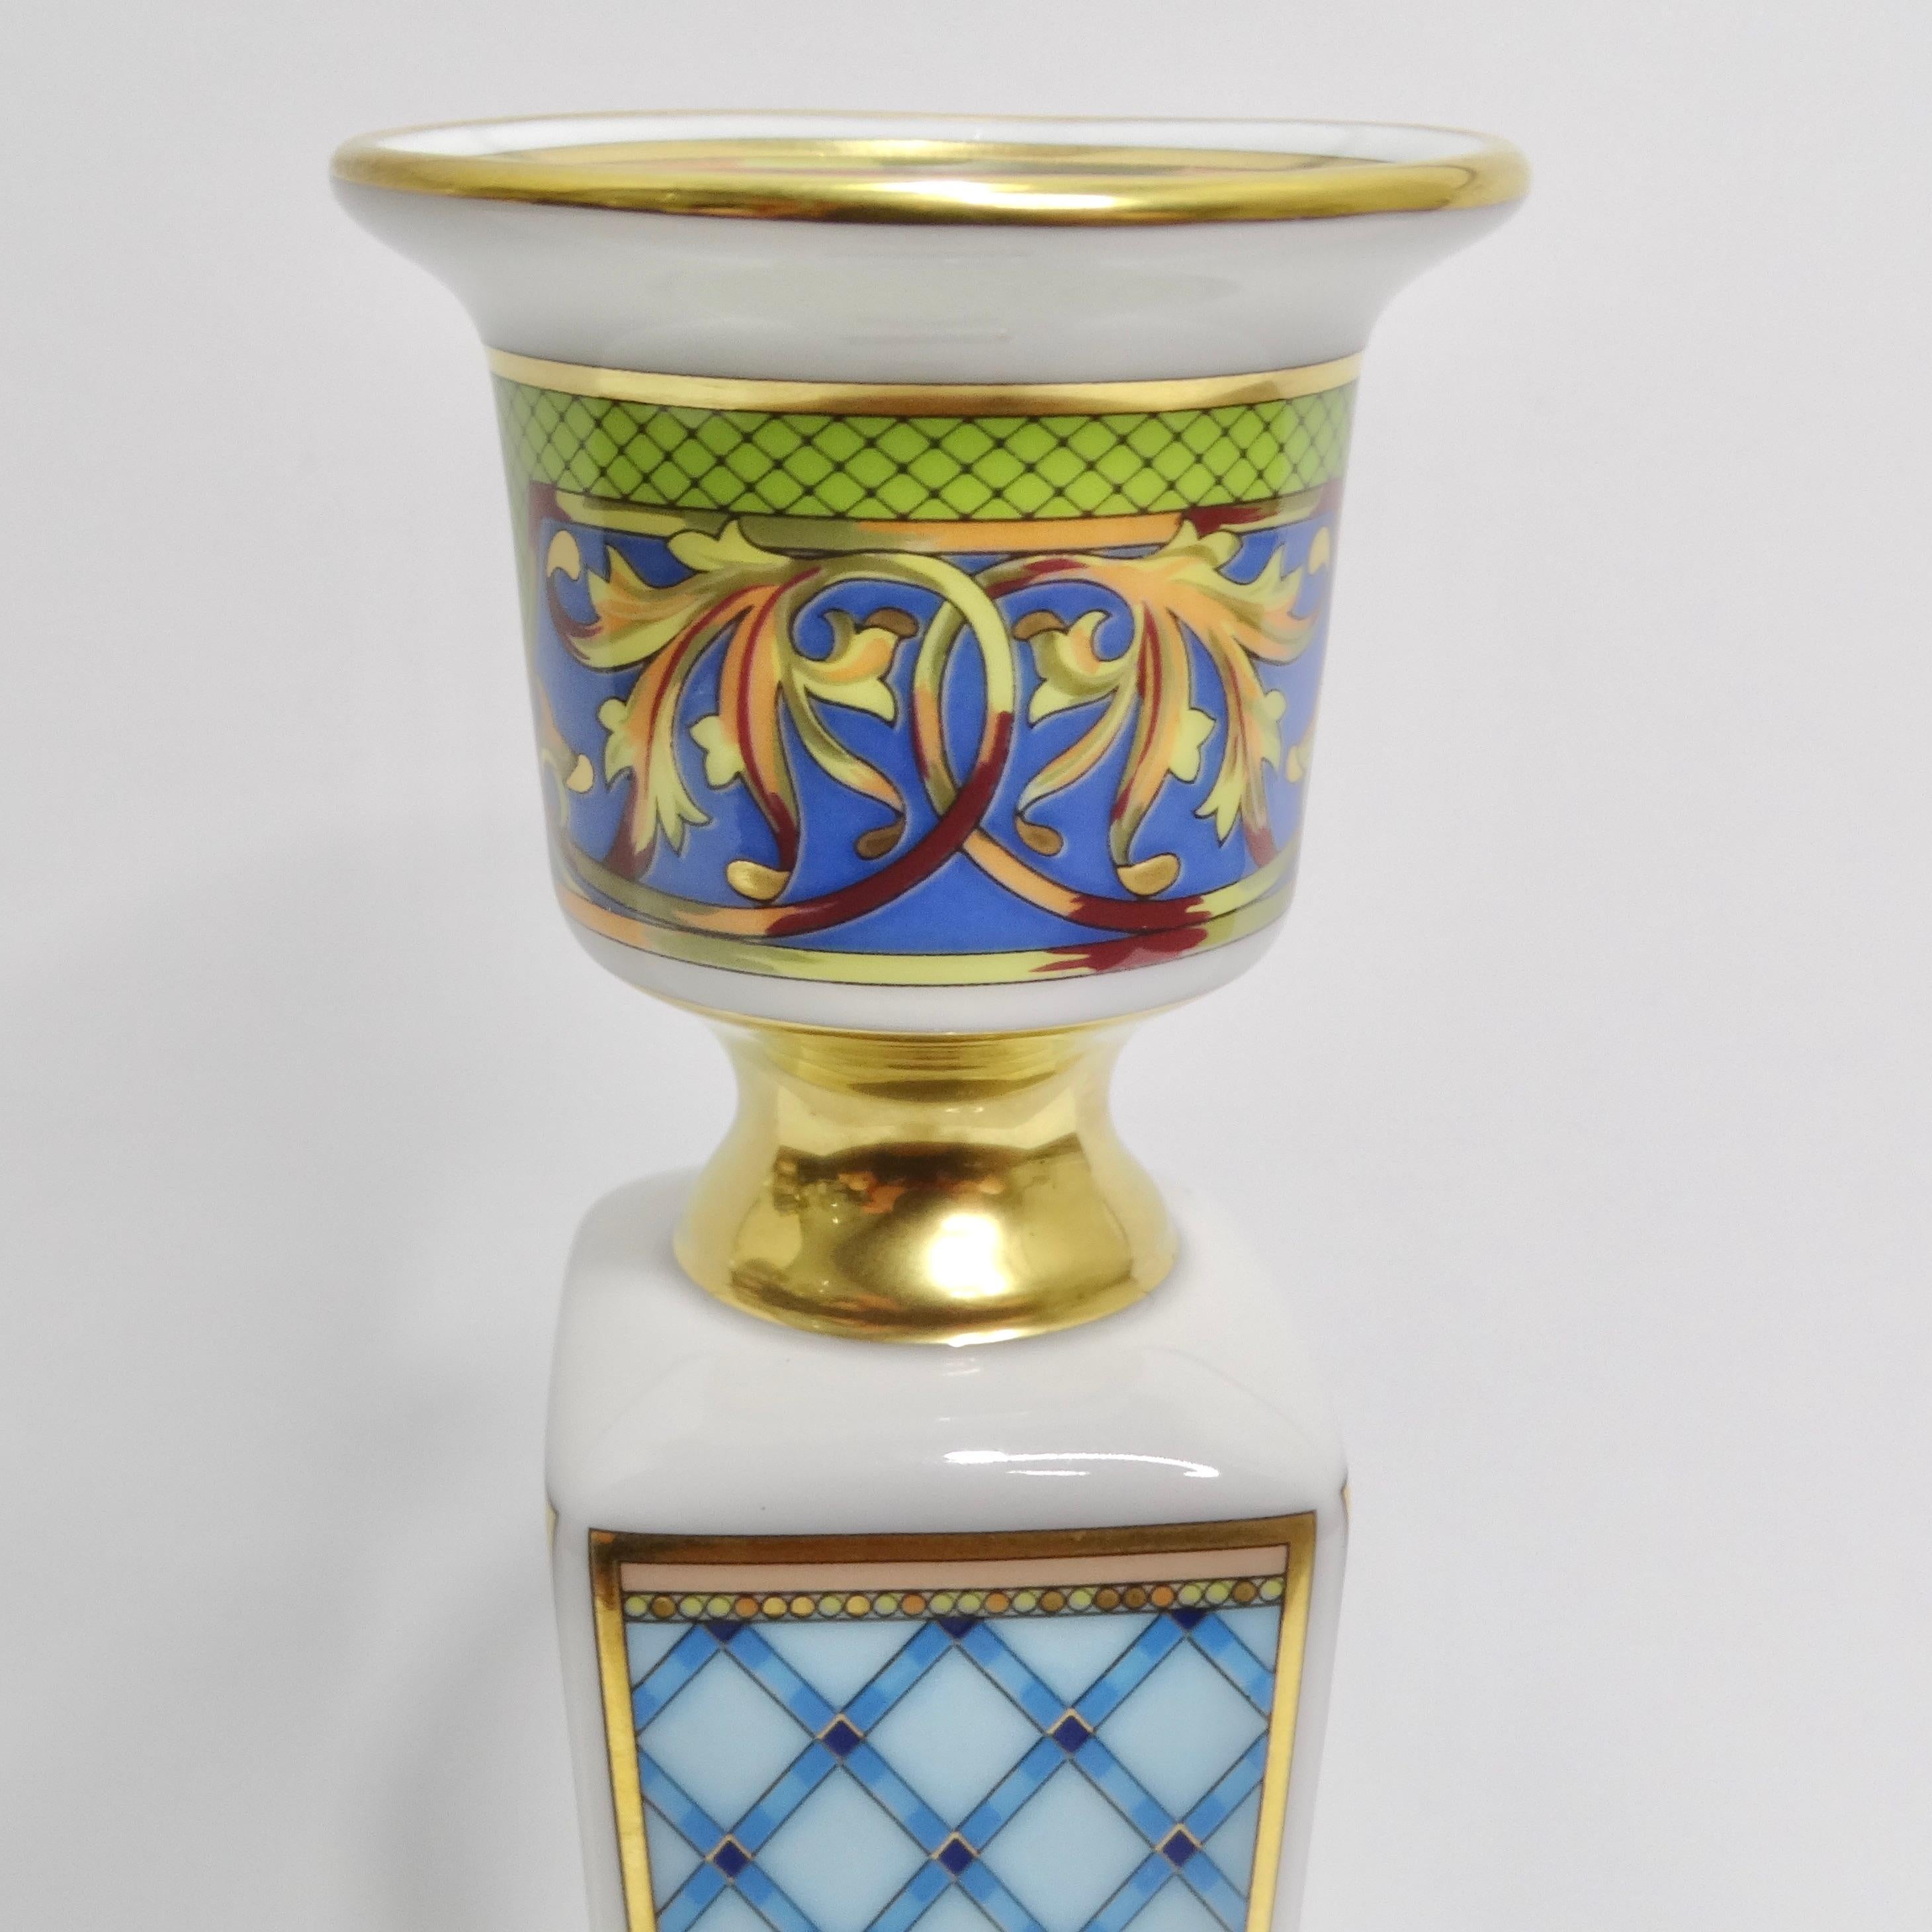 Versace Rosenthal 1990s Russian Dream Porcelain Candle Holder  In New Condition For Sale In Scottsdale, AZ